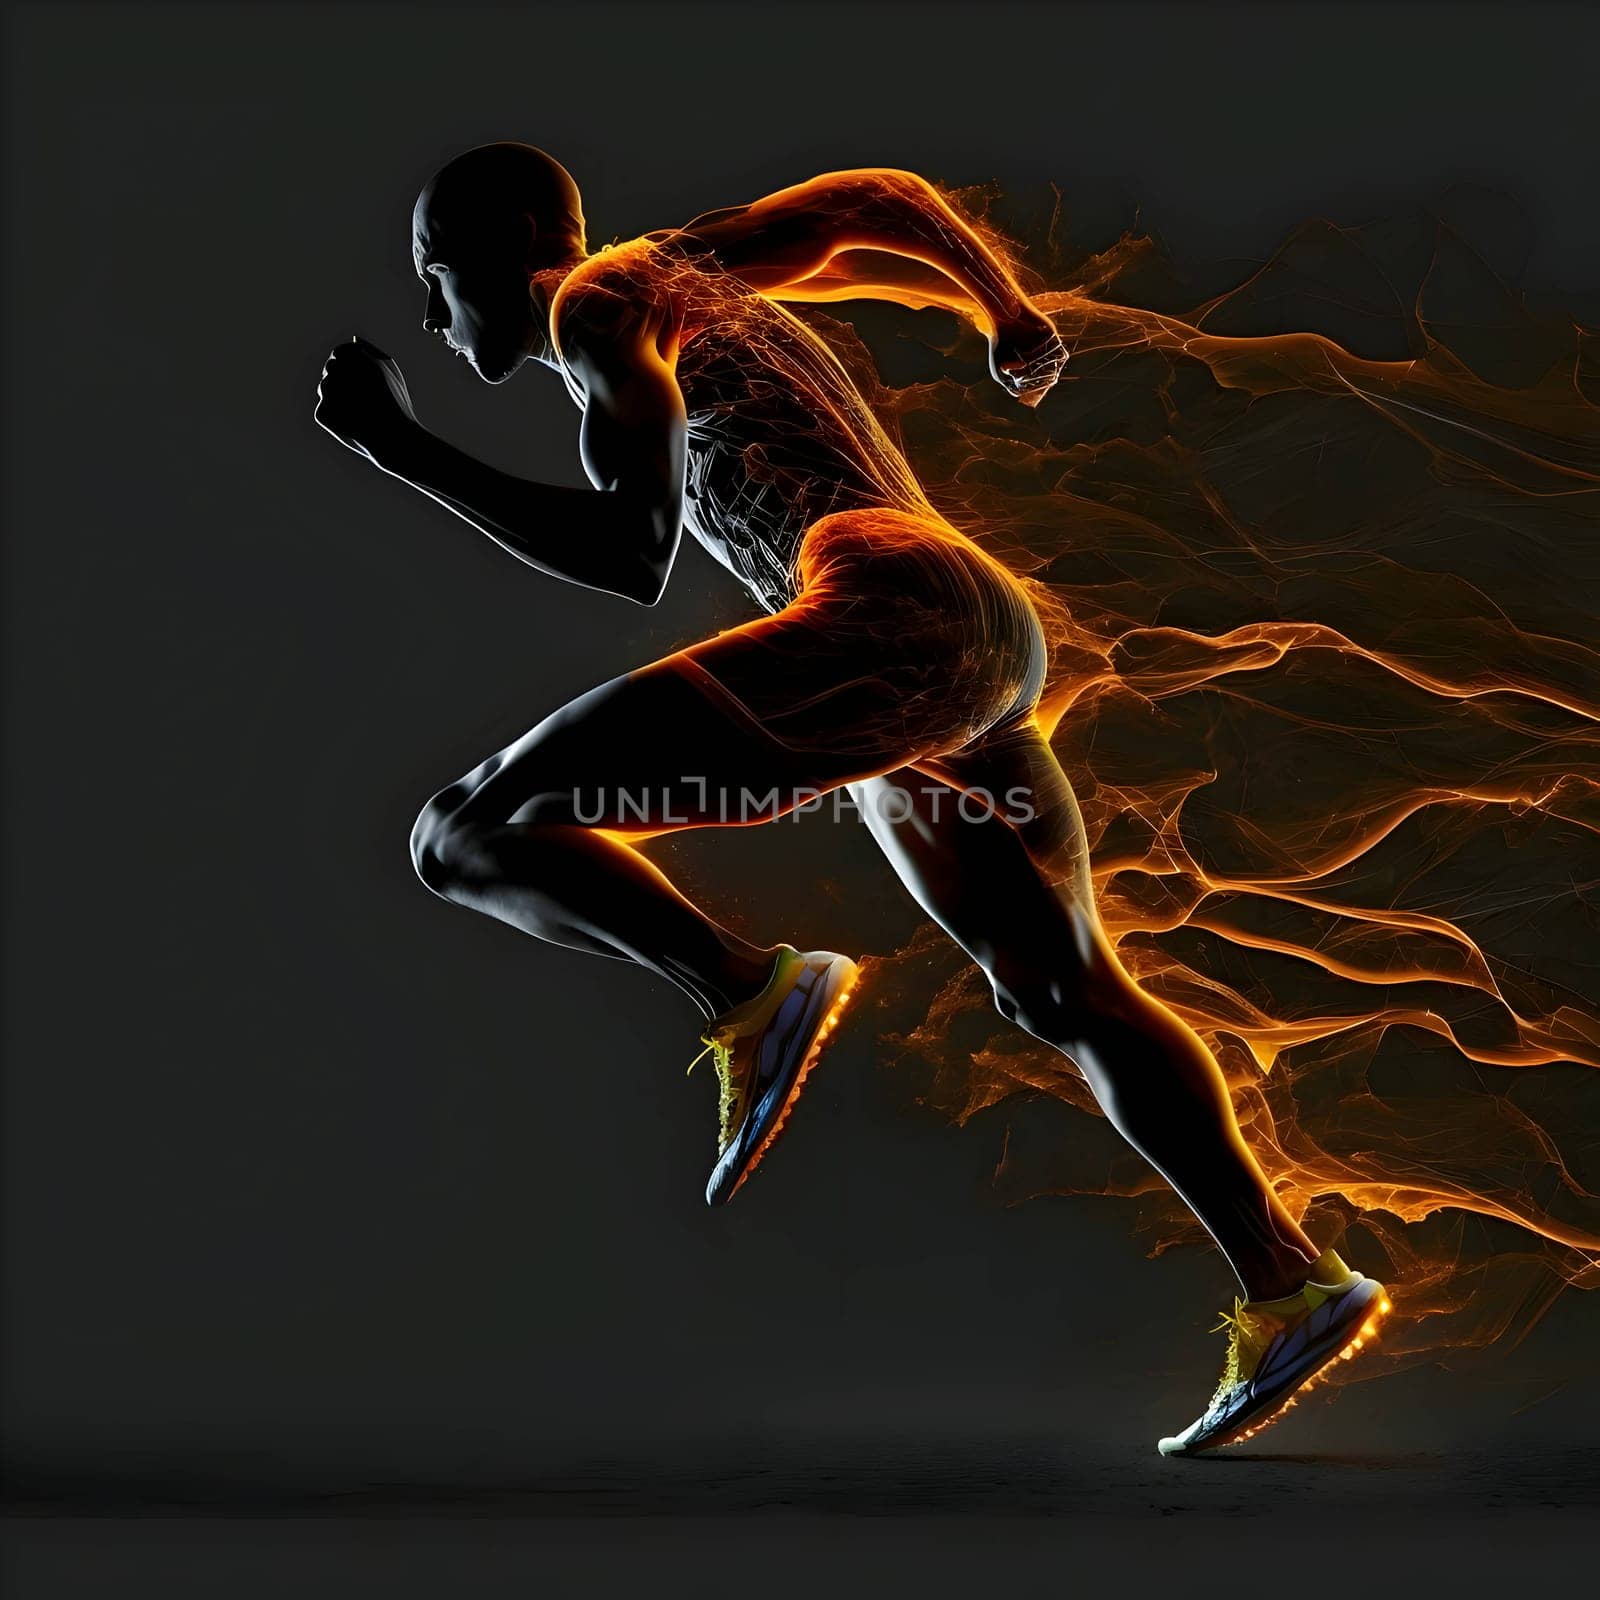 Vector illustration of a body on the move in black silhouette against a clean dark background, capturing graceful forms.